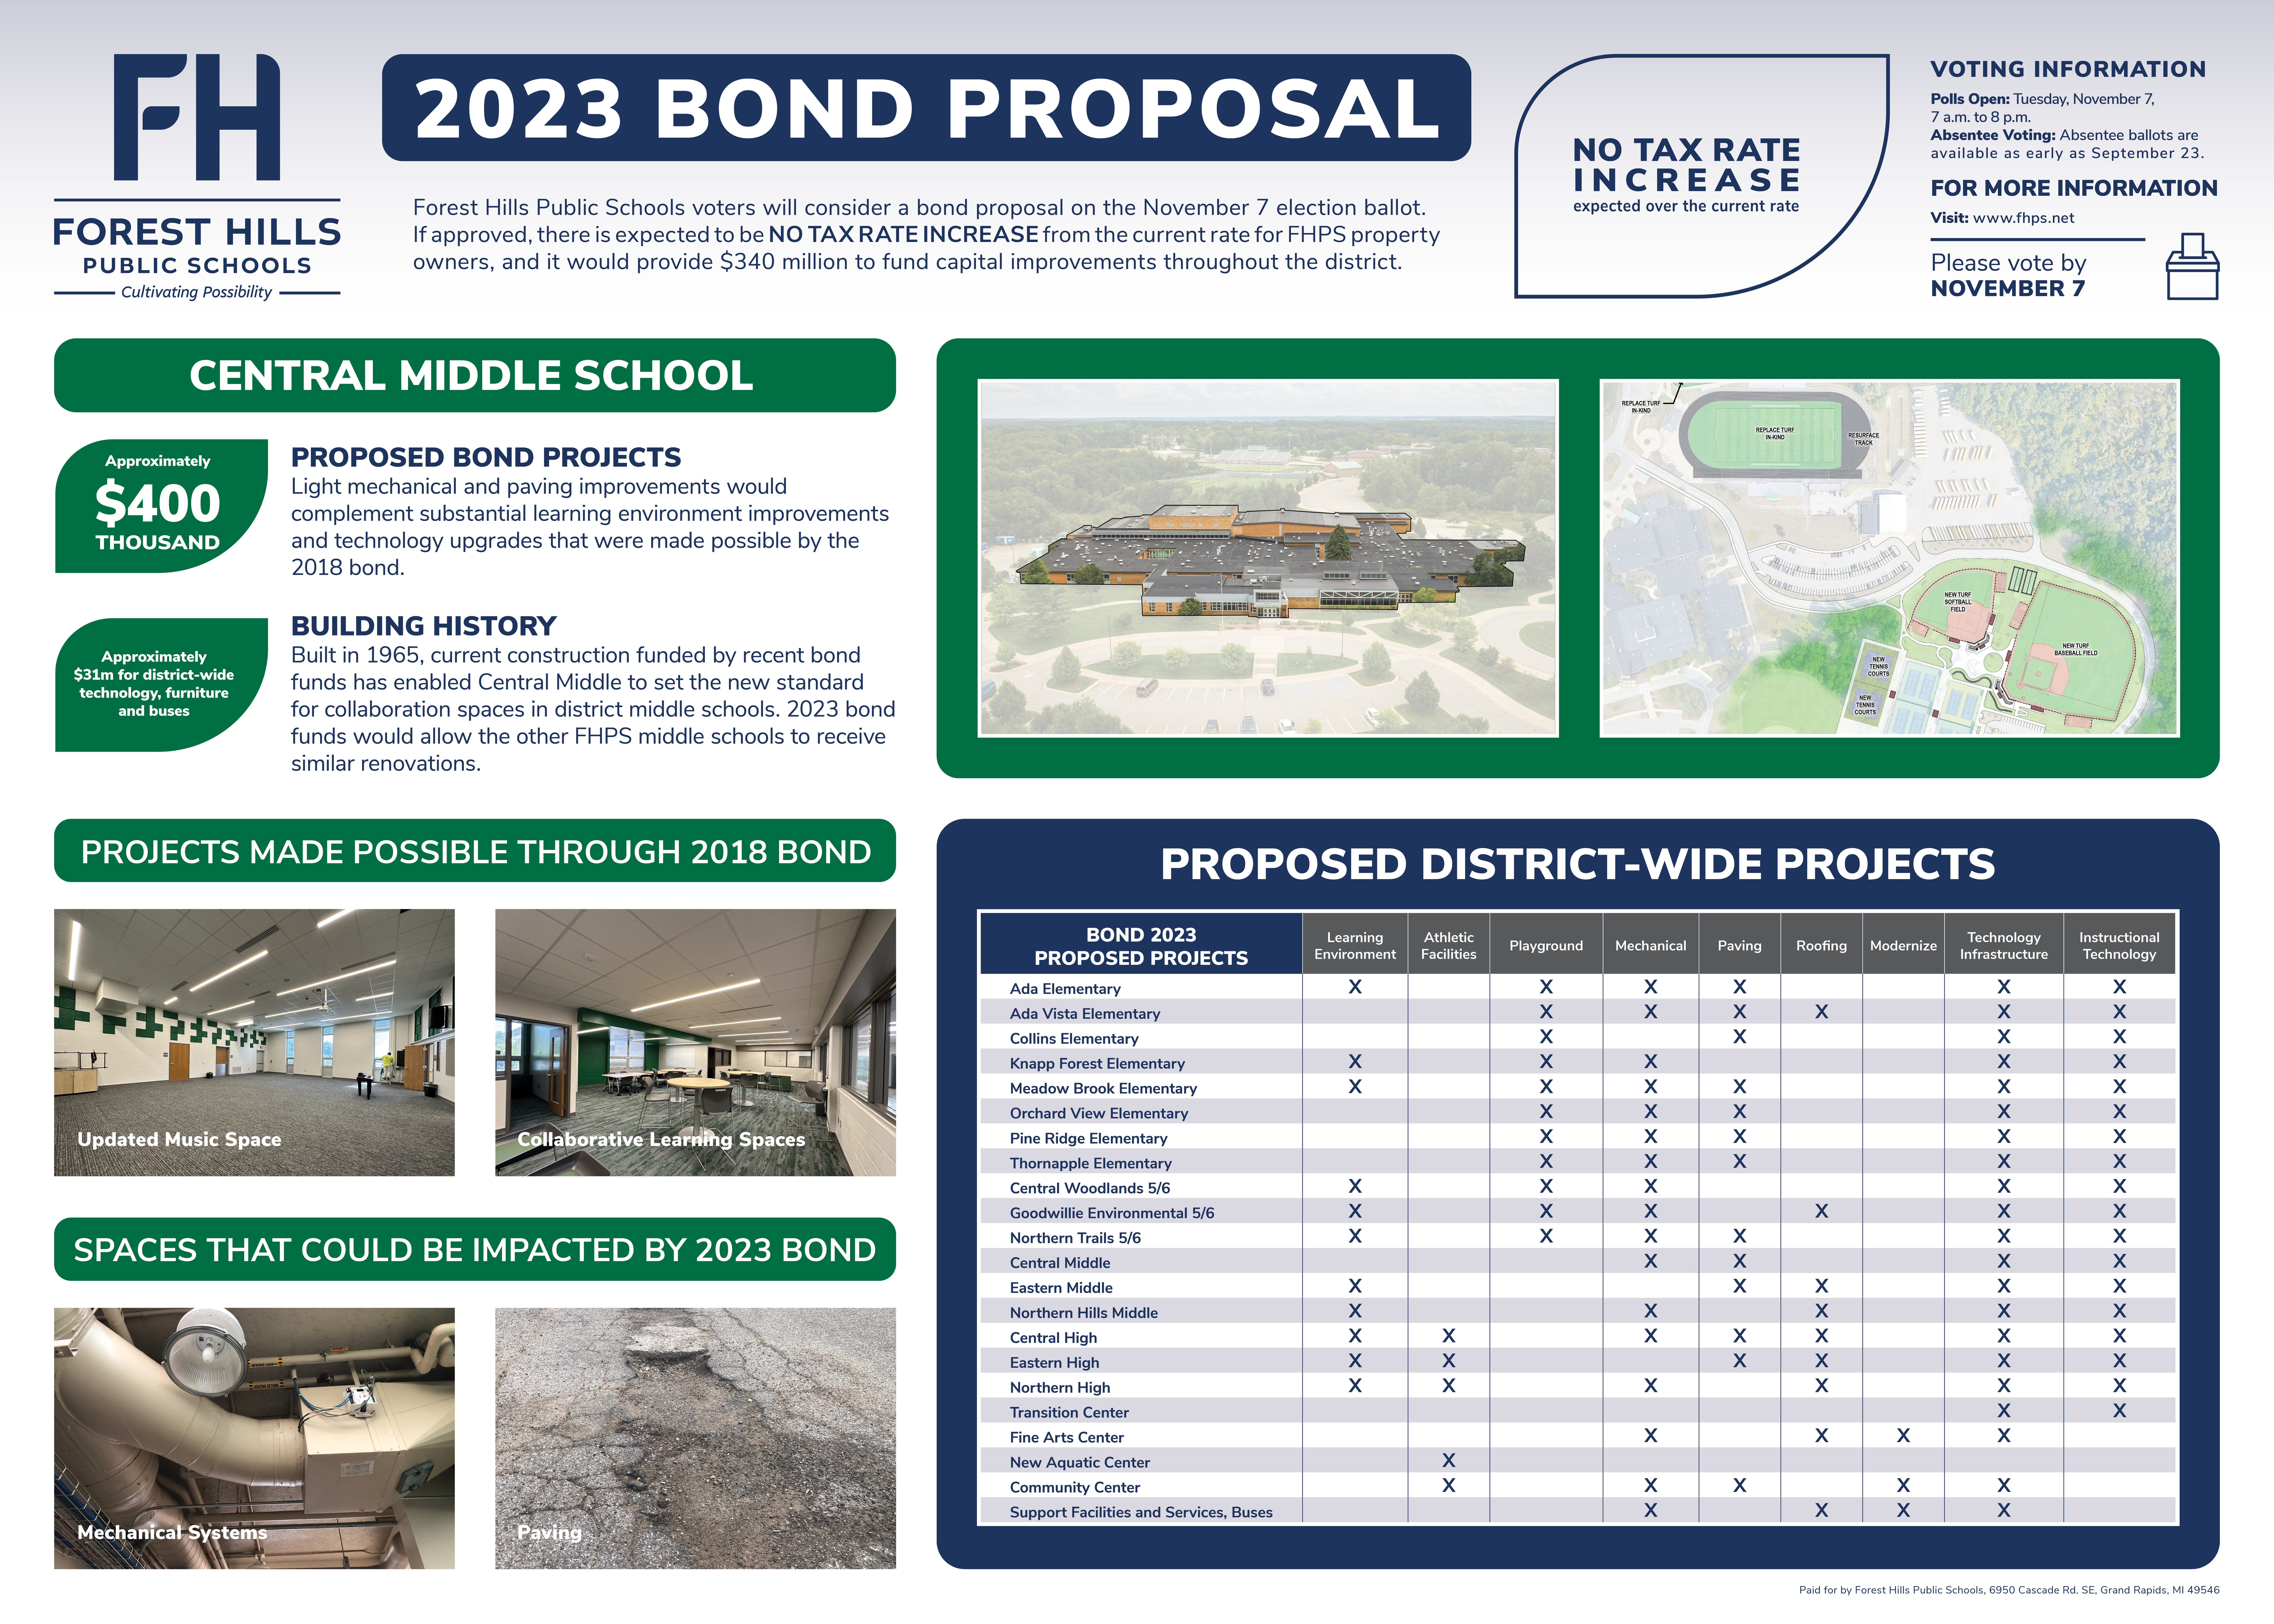 Central Middle and pictures of the existing building and bond project pictures from 2018 and spaces that could be impacted by the 2023 bond.